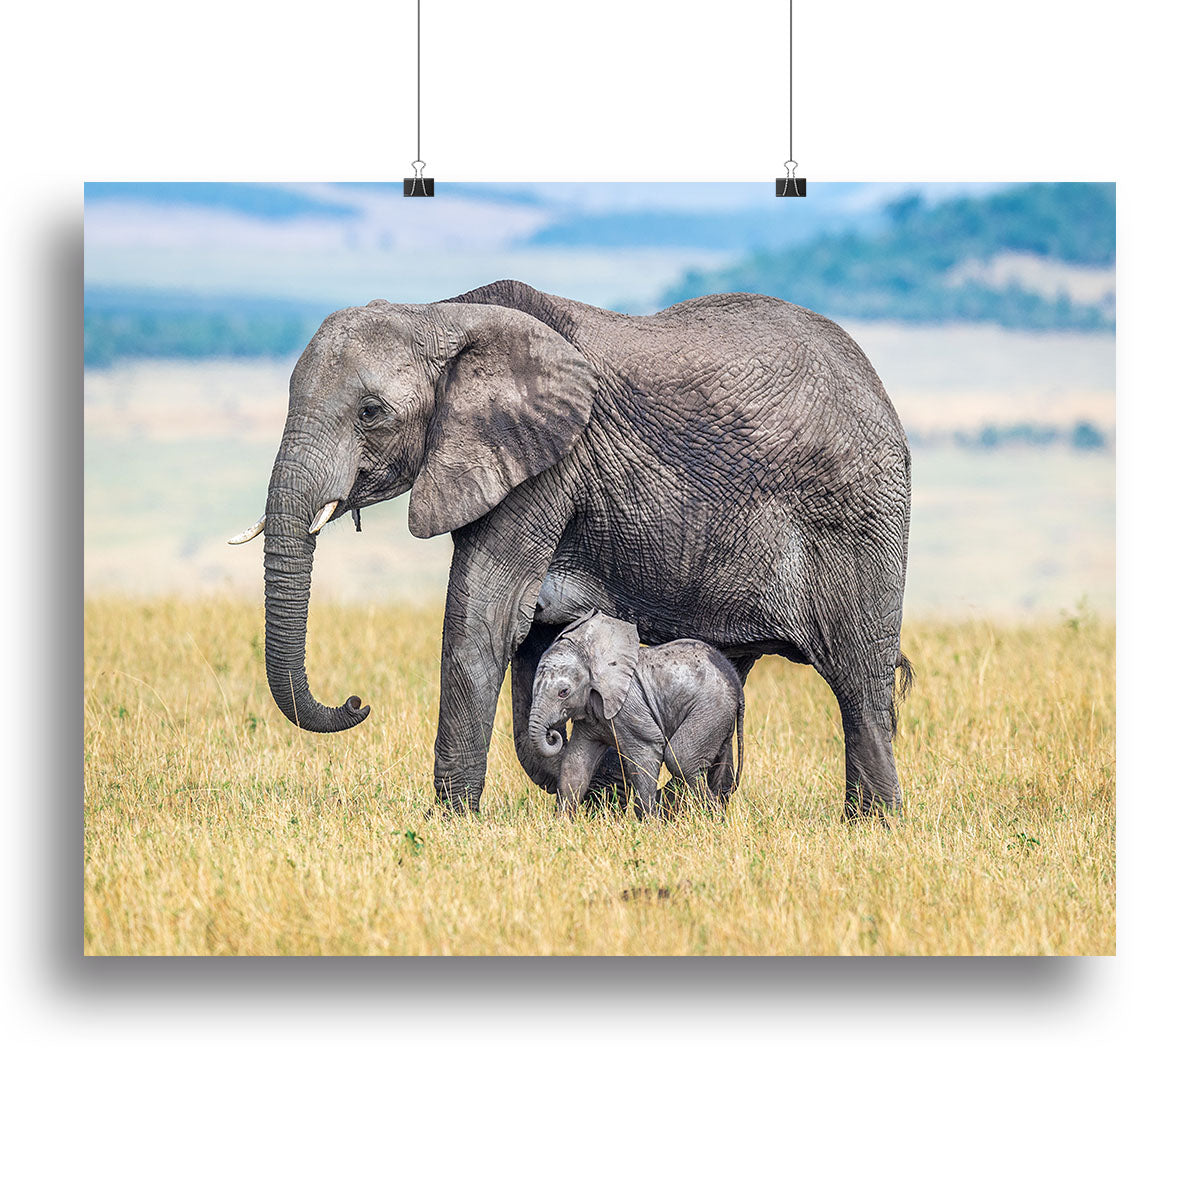 A wee one Canvas Print or Poster - 1x - 2